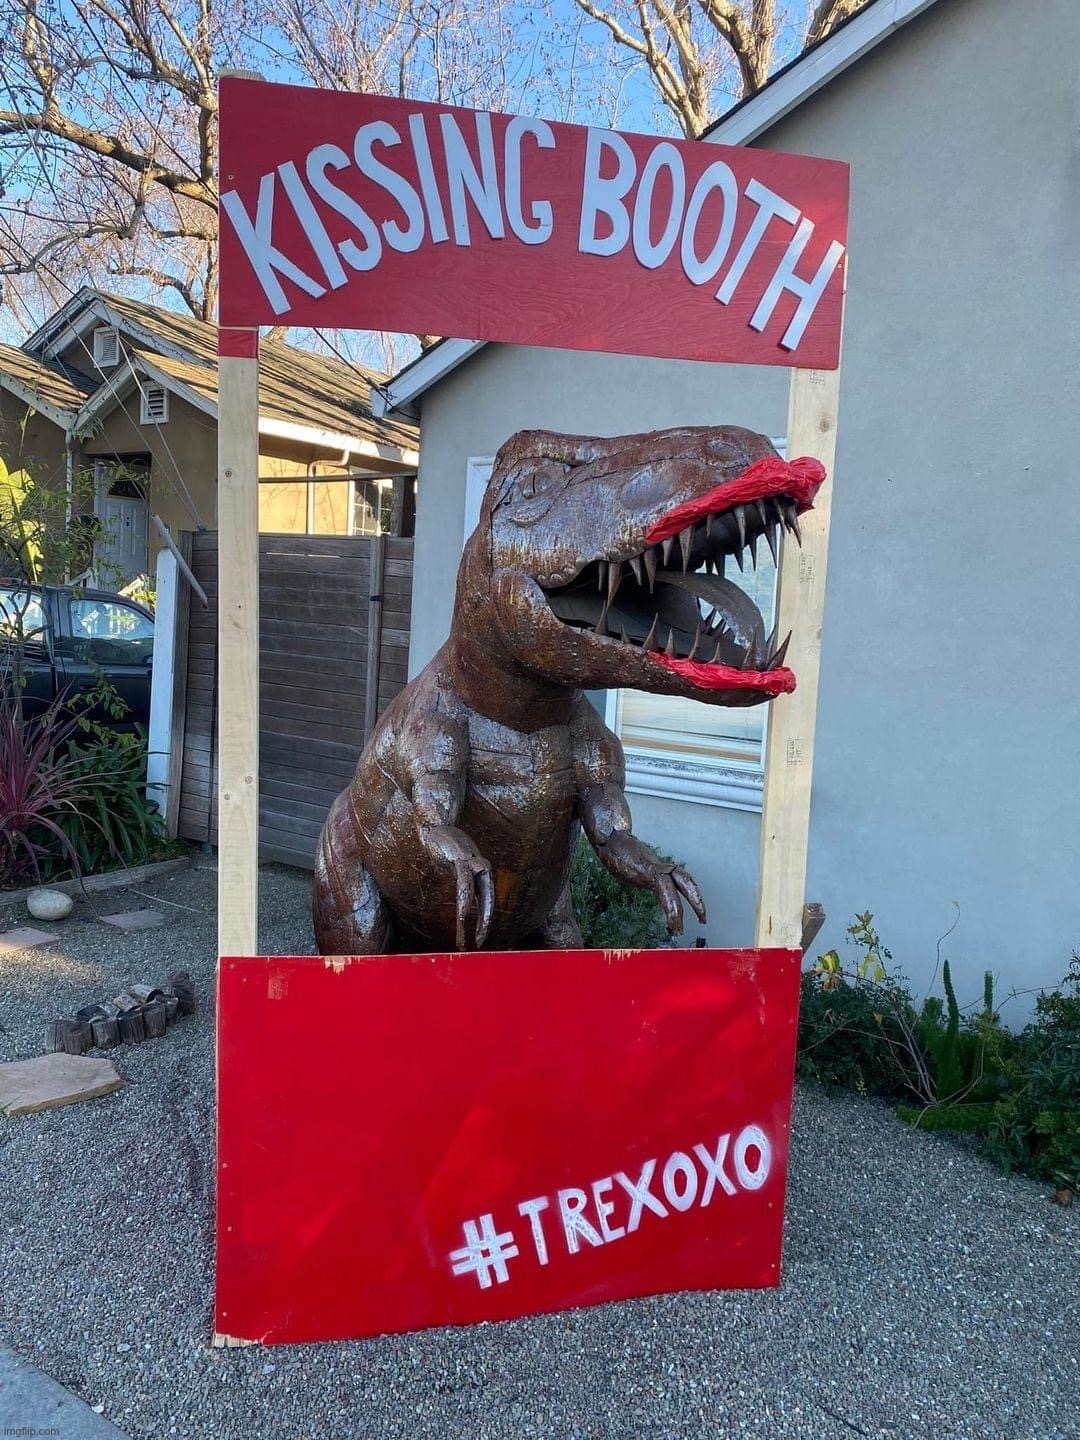 T-rex kissing booth | image tagged in t-rex kissing booth | made w/ Imgflip meme maker